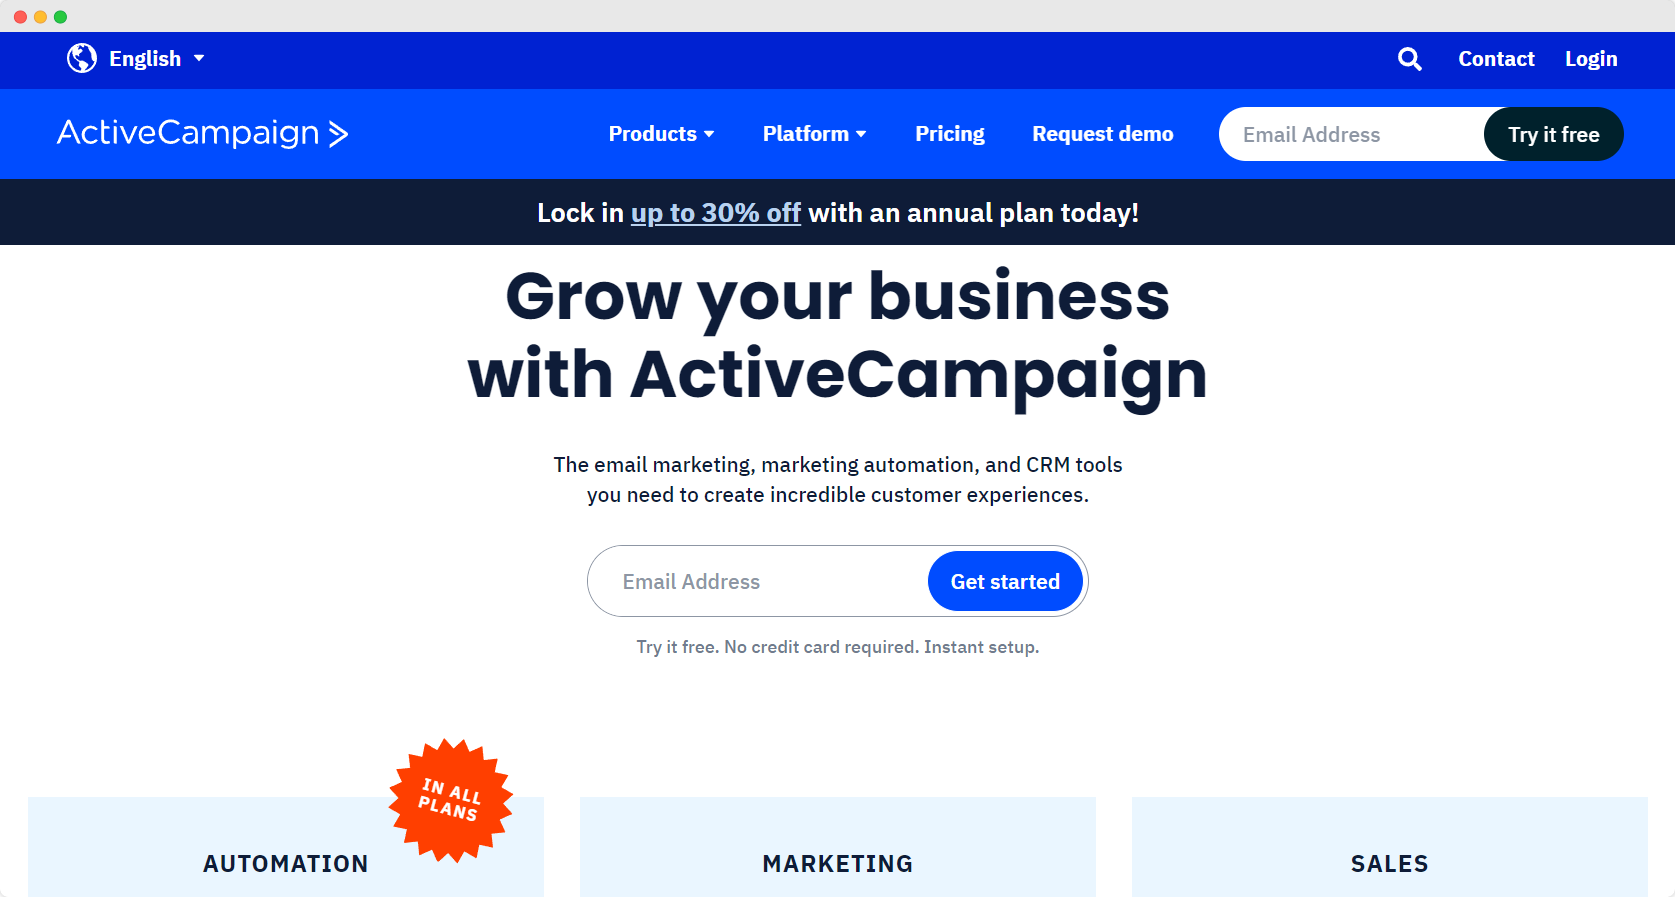 ActiveCampaign marketing tool